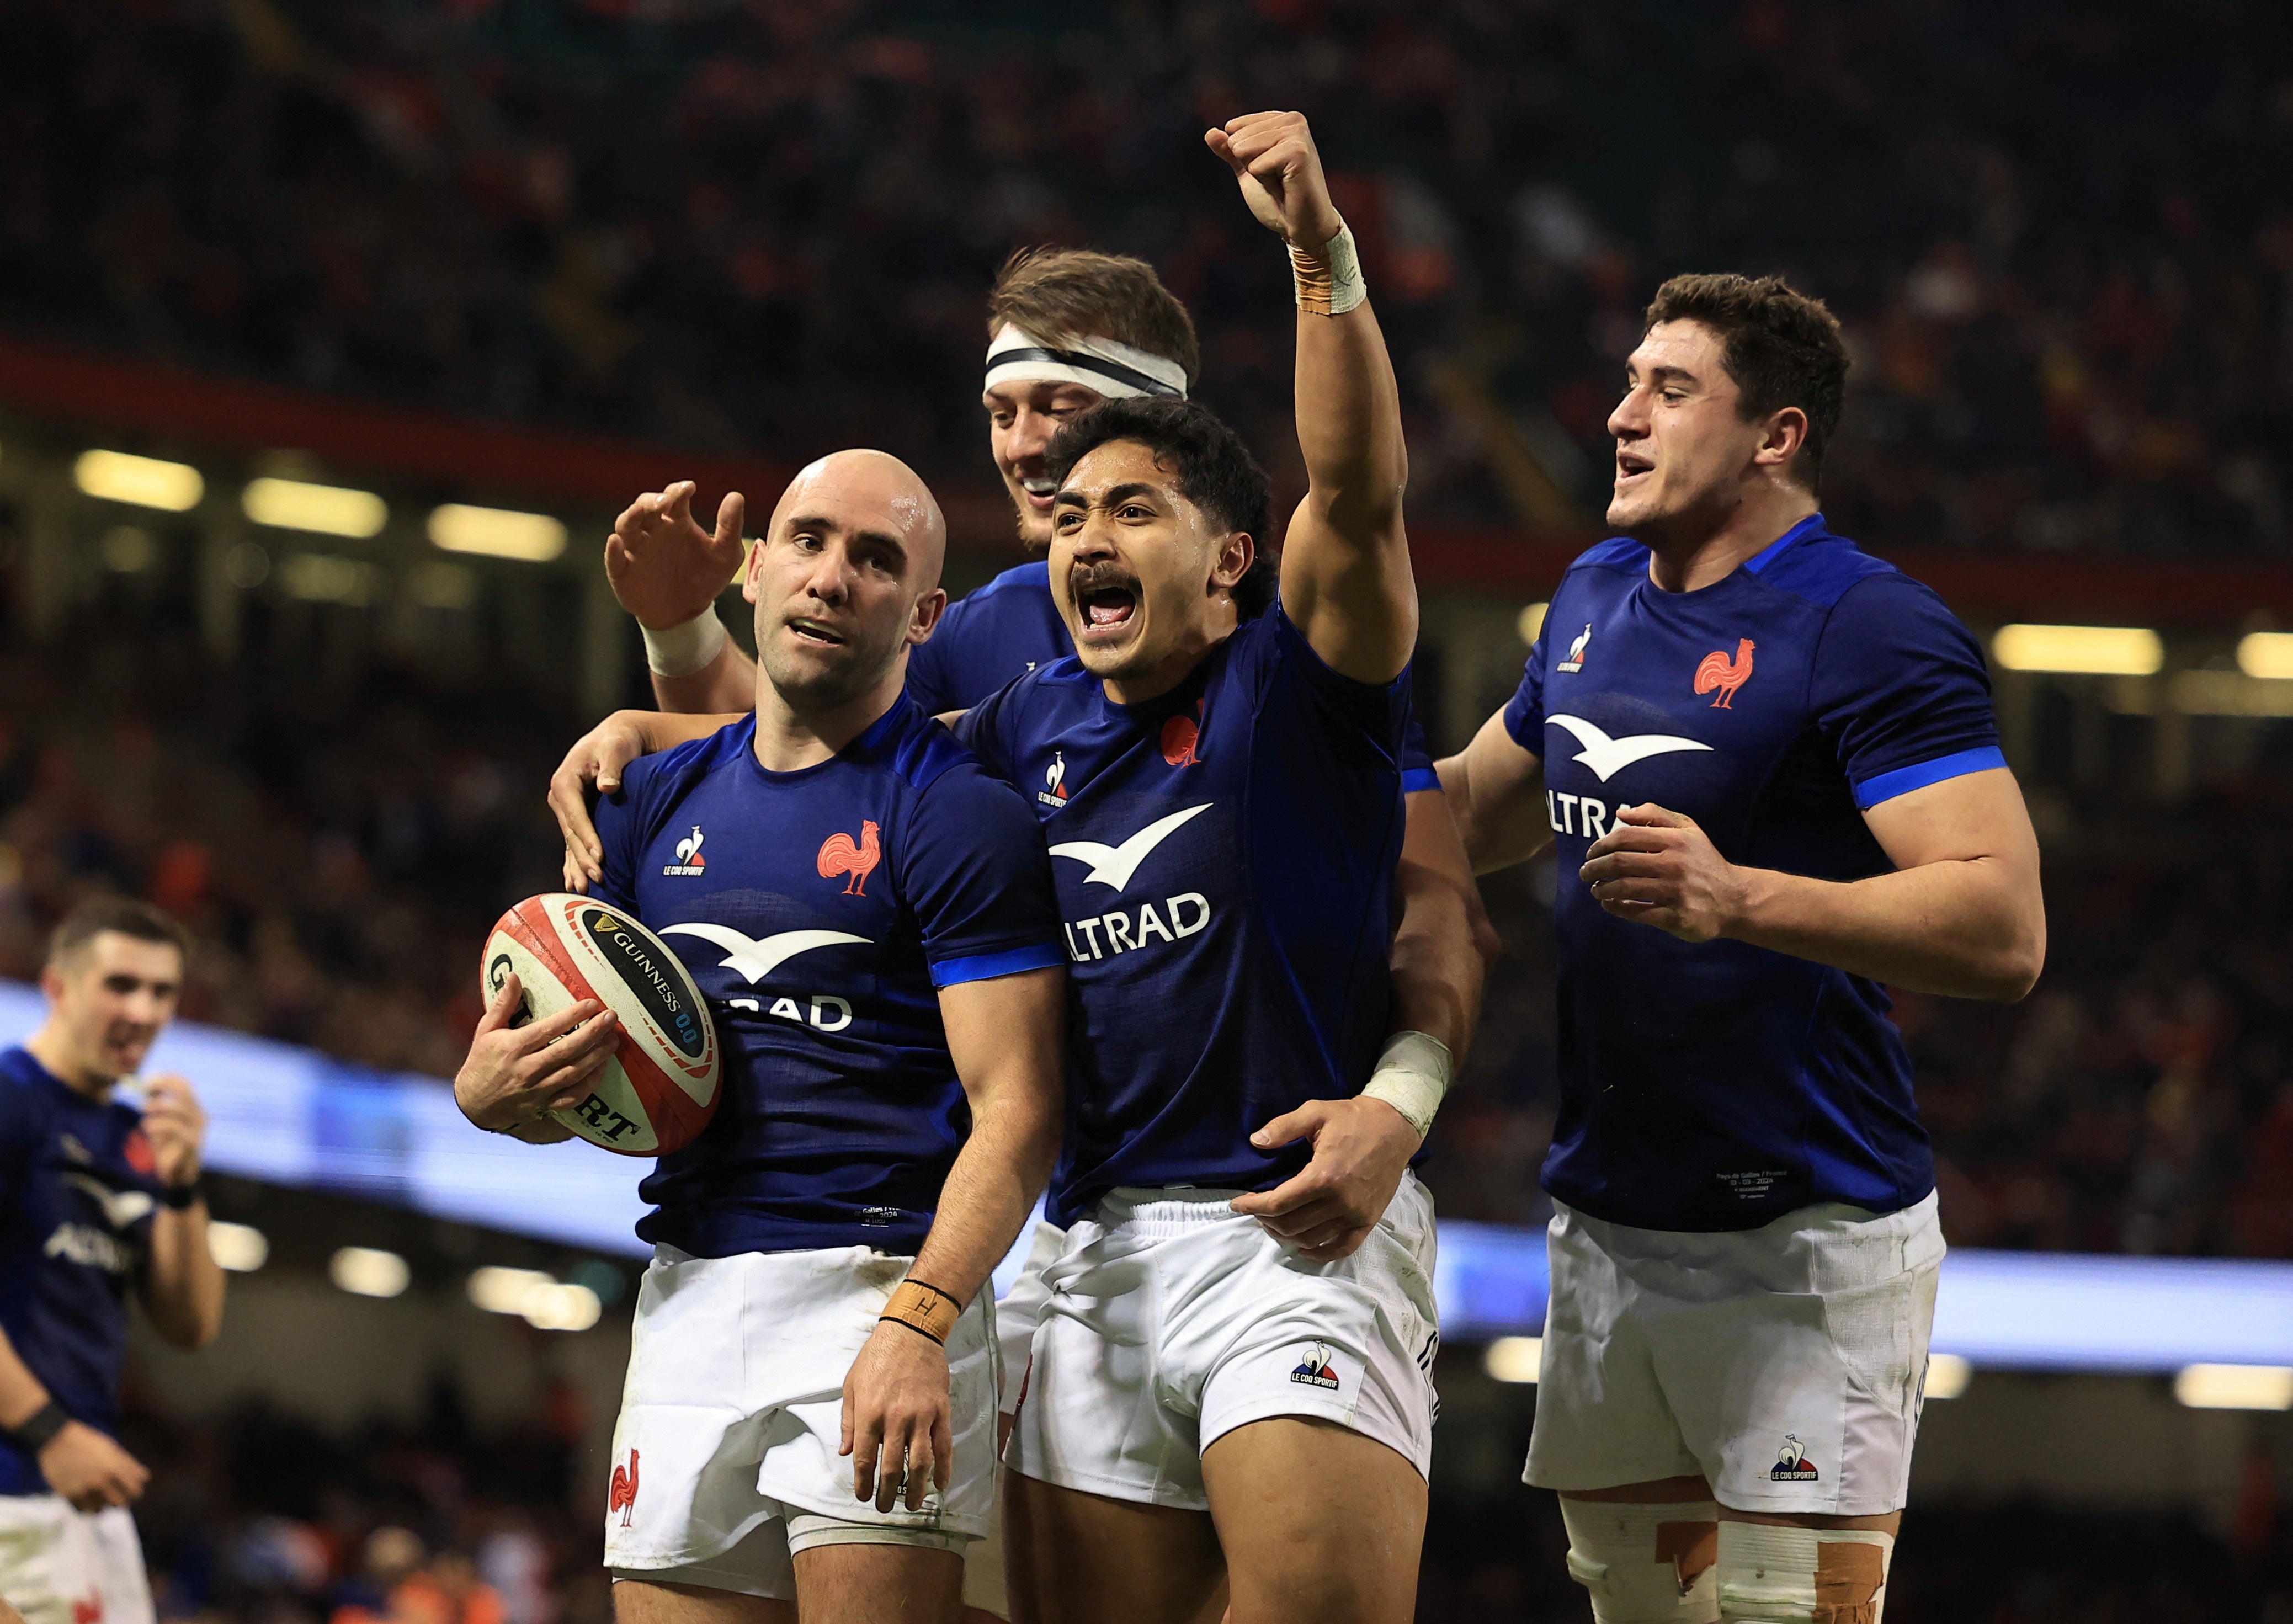 France will go into their clash with England on a high